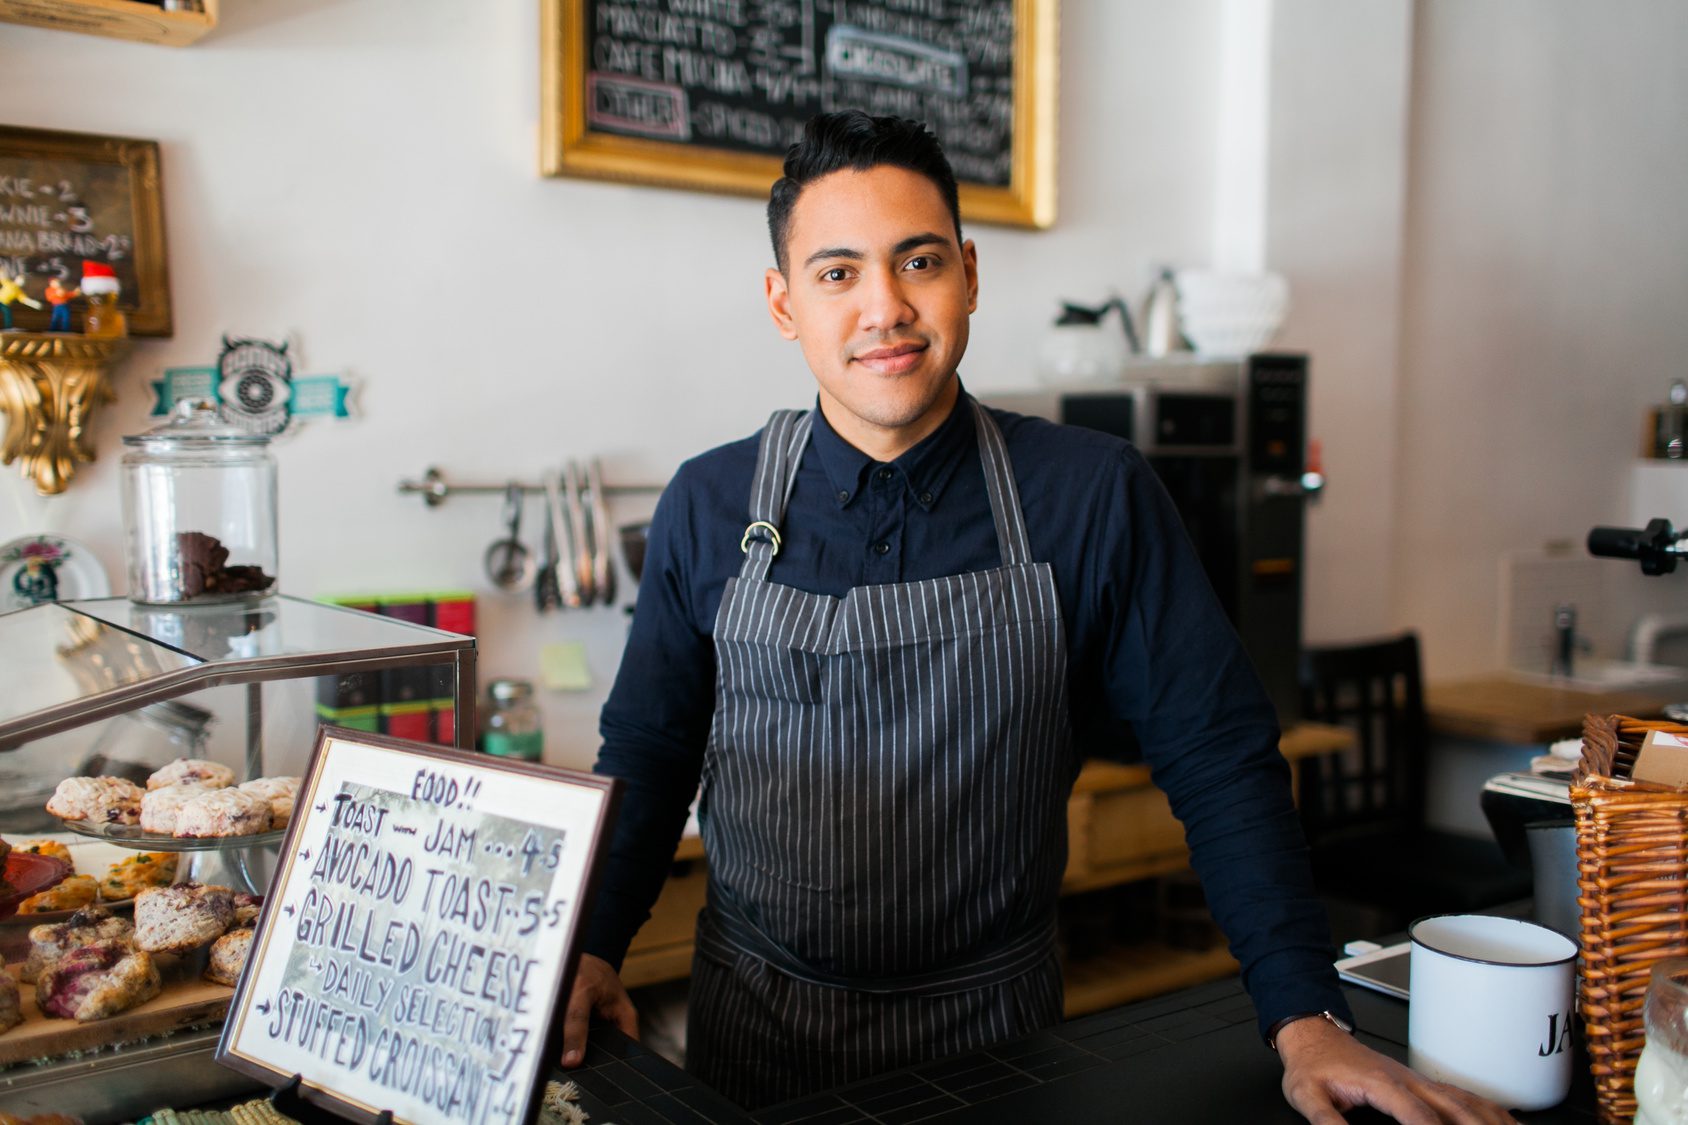 Immigrant Entrepreneurs Are Creating Jobs in the U.S.